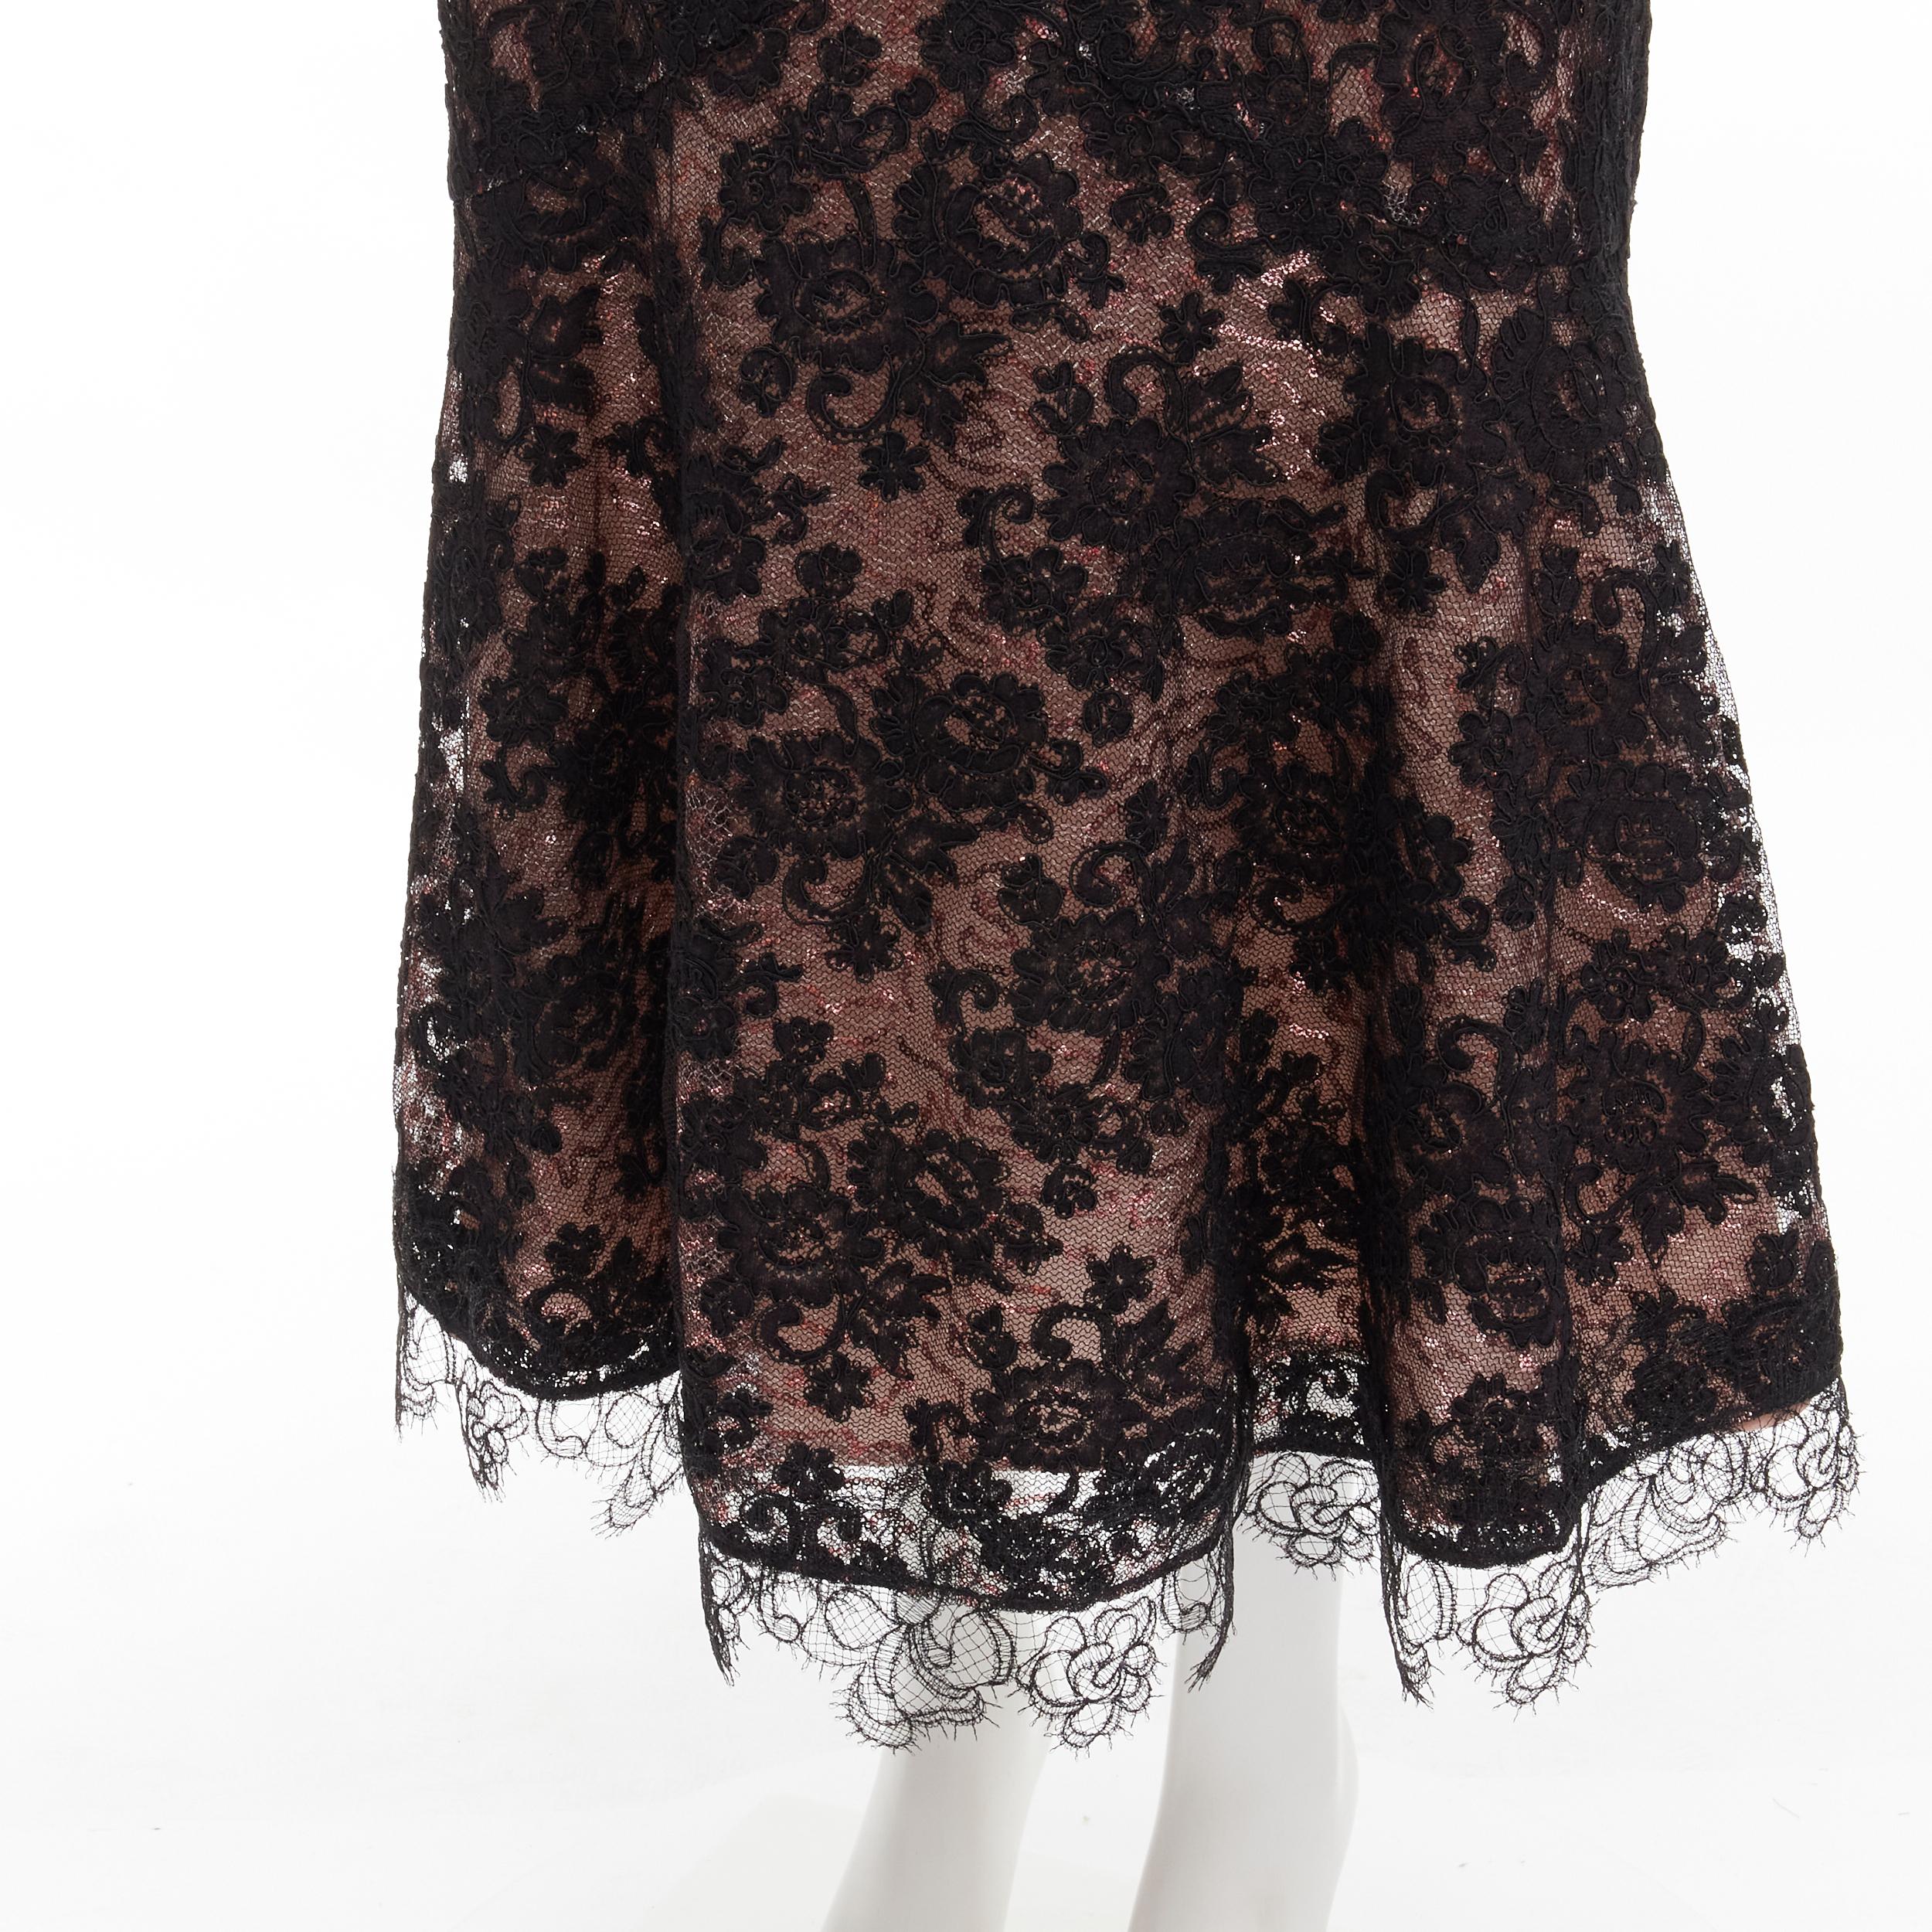 SILVIA TCHERASSI Marghera pink sequins floral embroidery lace overlay skirt XS
Brand: Silvia Tcherassi
Material: Polyester
Color: Black
Pattern: Lace
Closure: Zip
Made in: Colombia

CONDITION:
Condition: Excellent, this item was pre-owned and is in